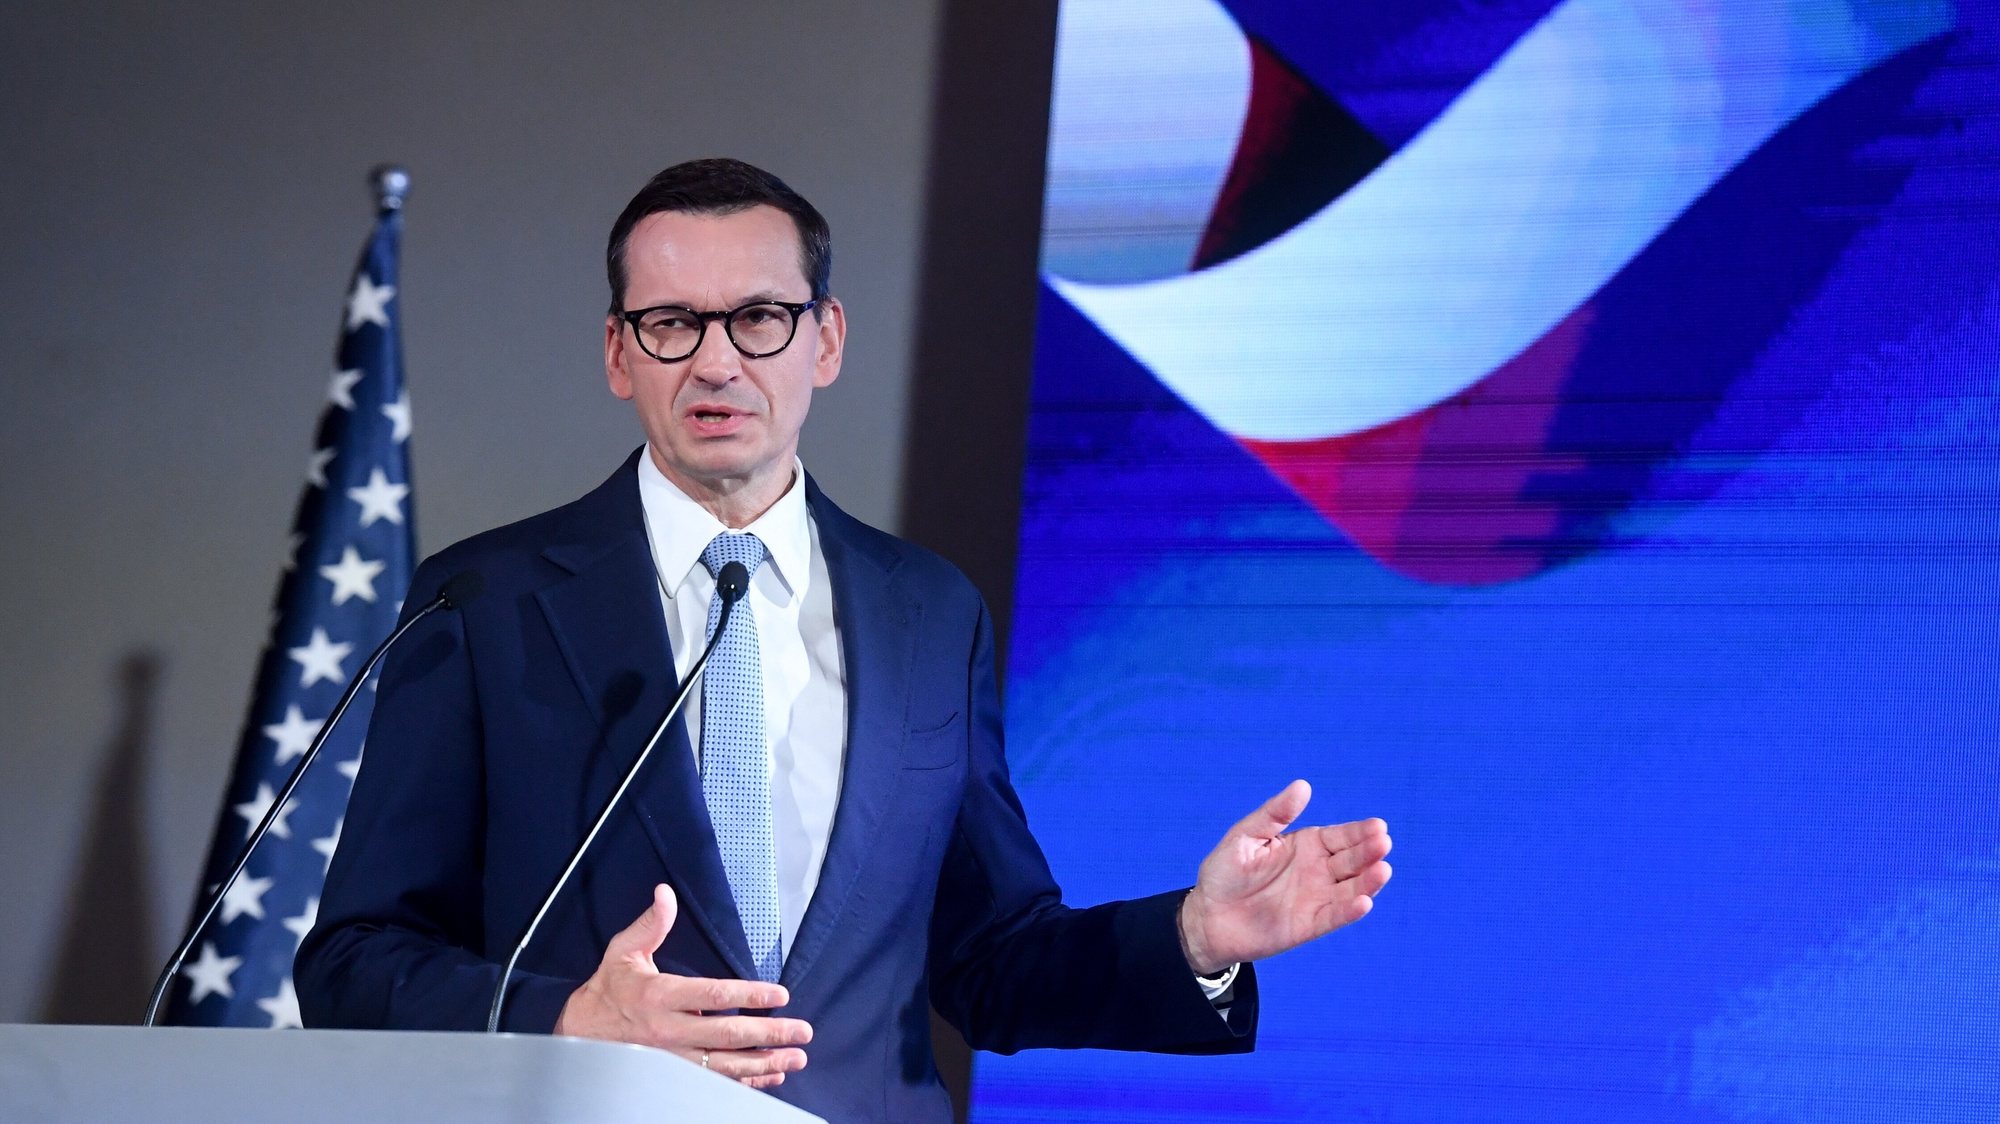 epa10885876 Polish Prime Minister Mateusz Morawiecki speaks during a ceremony of signing a design agreement for Poland&#039;s first nuclear power plant at the Kubicki Arcades in Warsaw, Poland, 27 September 2023. Polskie Elektrownie Jadrowe (Polish Nuclear Plants, a state owned company) has signed a contract to design the first nuclear power plant in Poland with a consortium of Westinghouse -Bechtel.  EPA/PIOTR NOWAK POLAND OUT